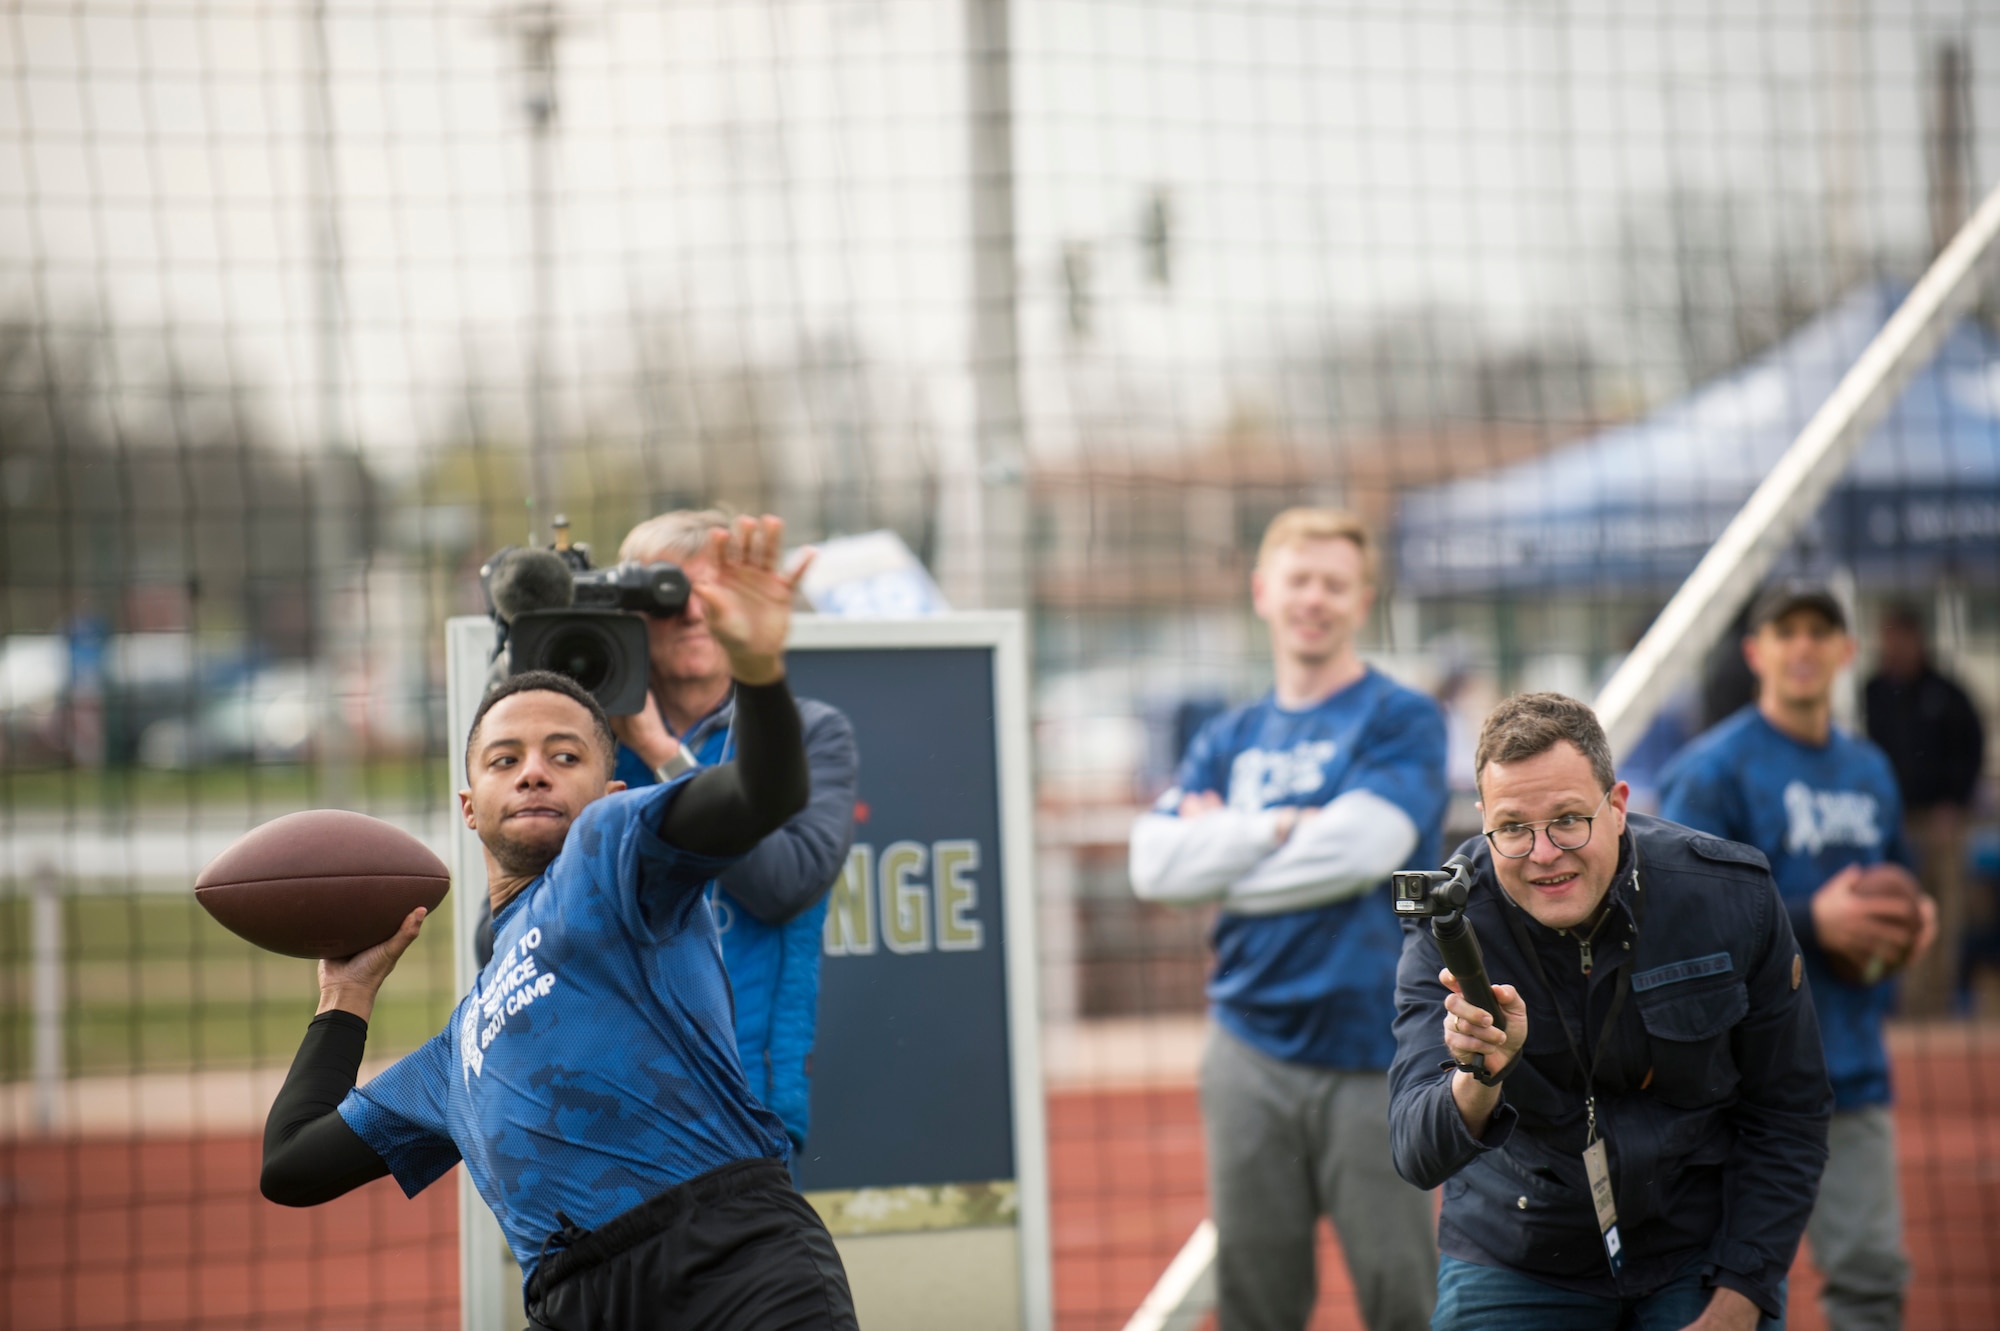 An Alejandro Villanueva football camp attendee throws a football while NBC Europe videographers film during a football distance throw drill at Kaiserslautern High School on Vogelweh Military Complex, Germany, April 13, 2019. Villanueva, Pittsburgh Steelers offensive lineman, served in the U.S. Army before becoming a professional football player. (U.S. Air Force photo by Staff Sgt. Jonathan Bass)